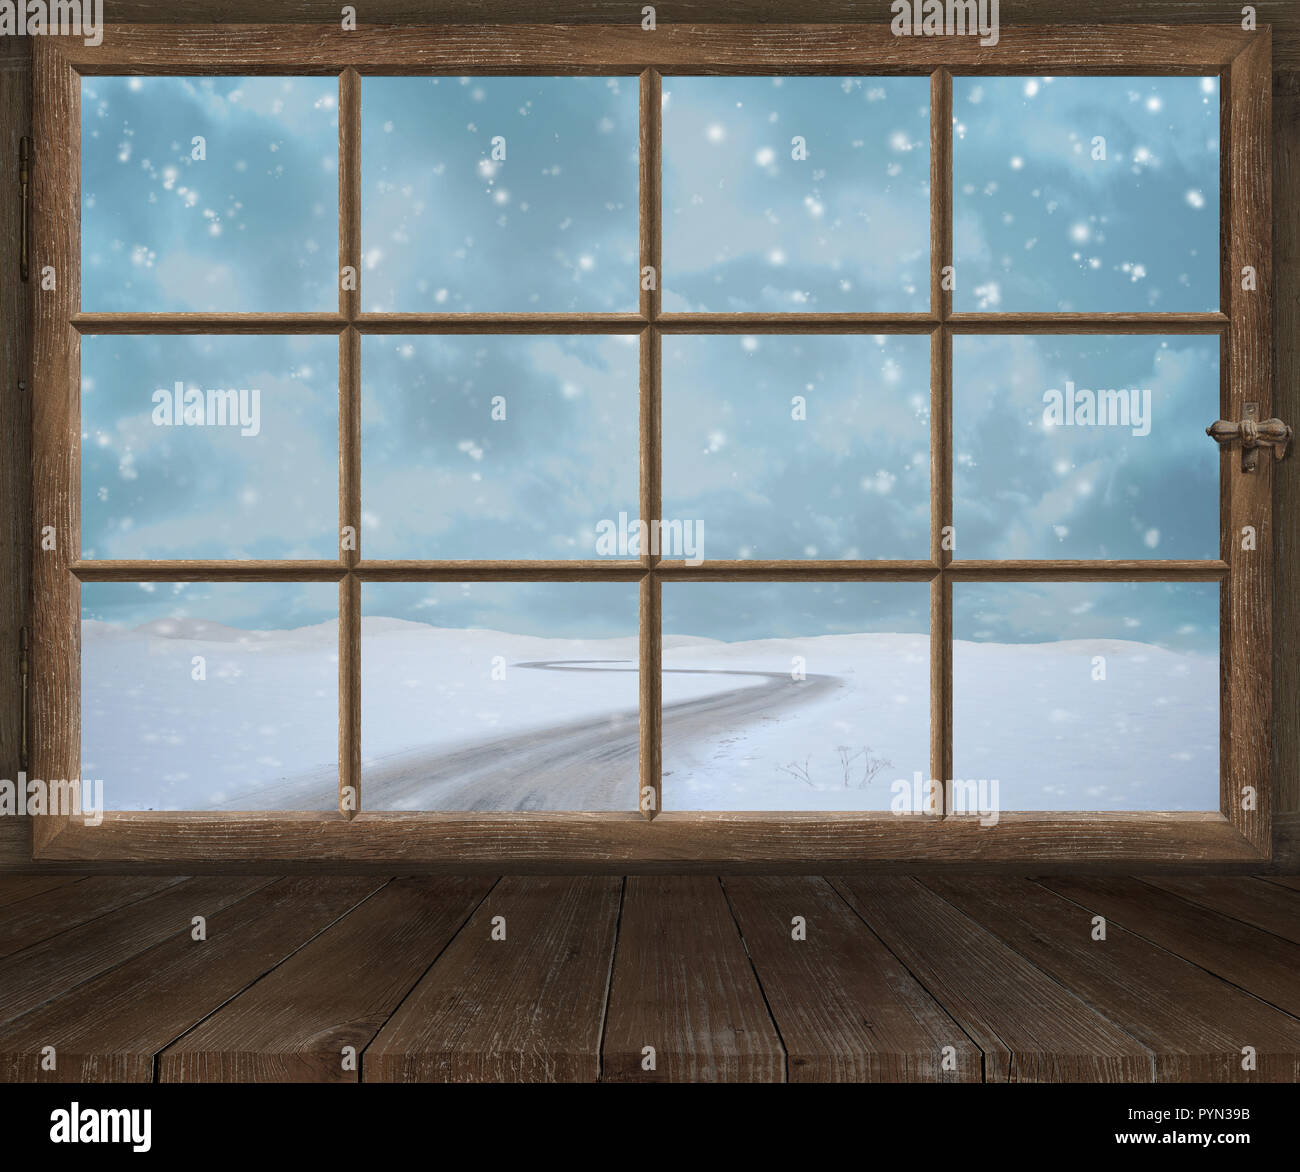 window old wood frame sprouts winter christmas Stock Photo